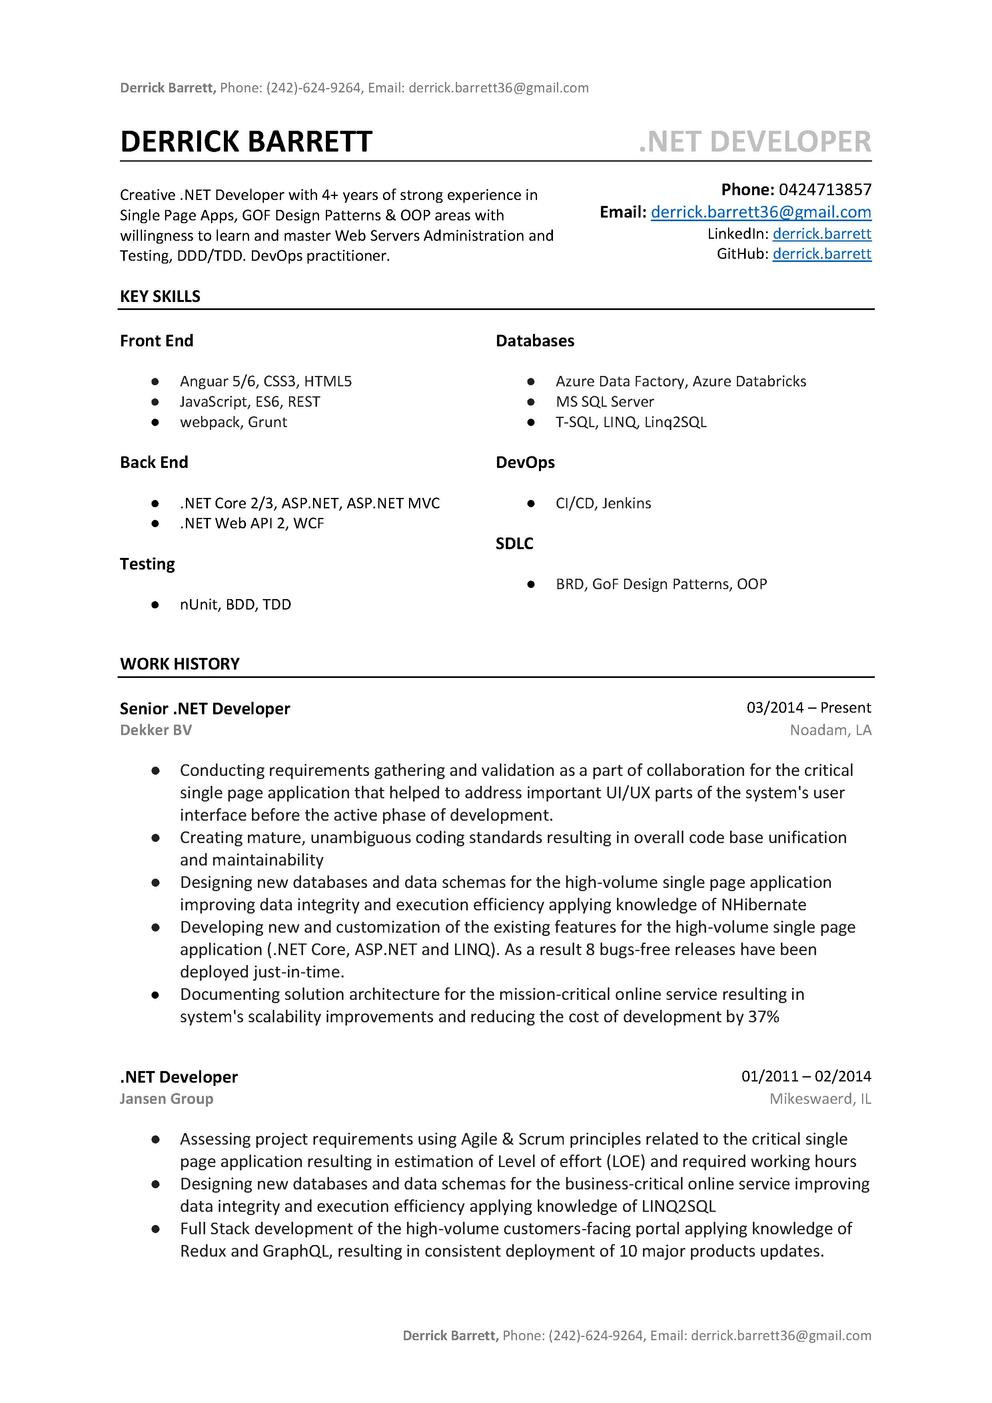 Net Mvc Experience with Sql Resume Samples 101-developer-resume-cv-templates/net-developer-resume-sample.md …